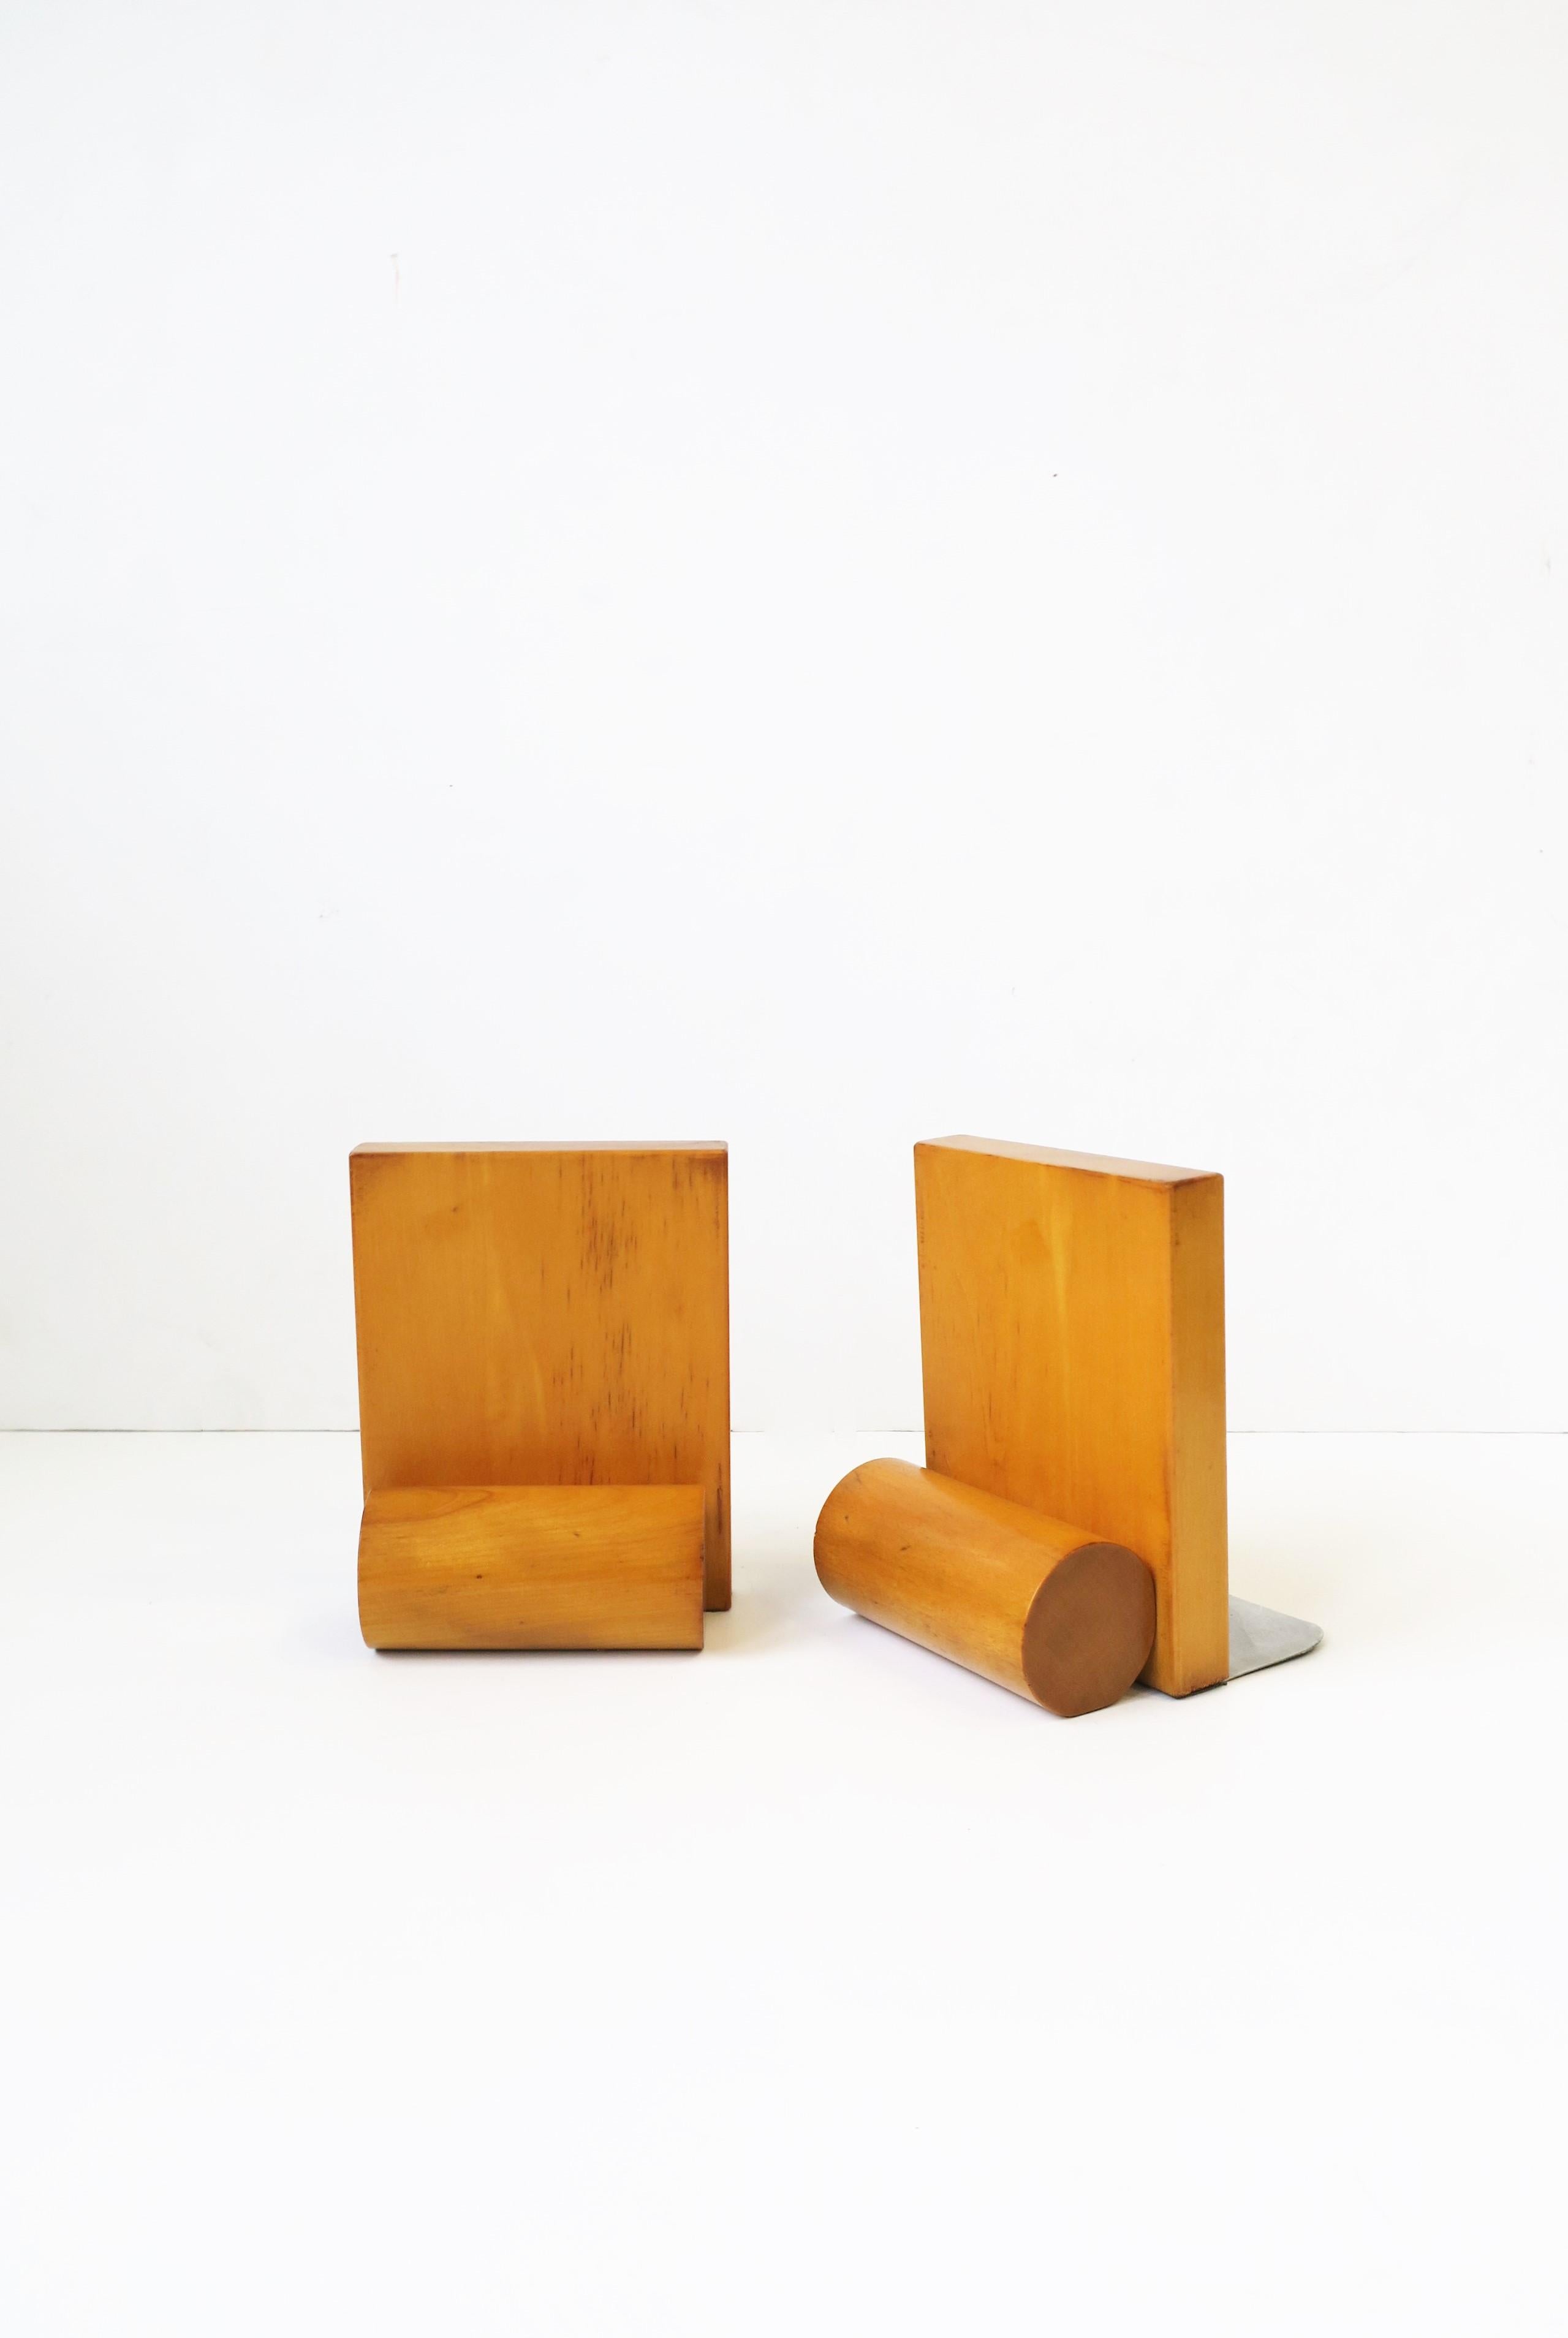 20th Century Art Deco Modern Bookends, Pair For Sale